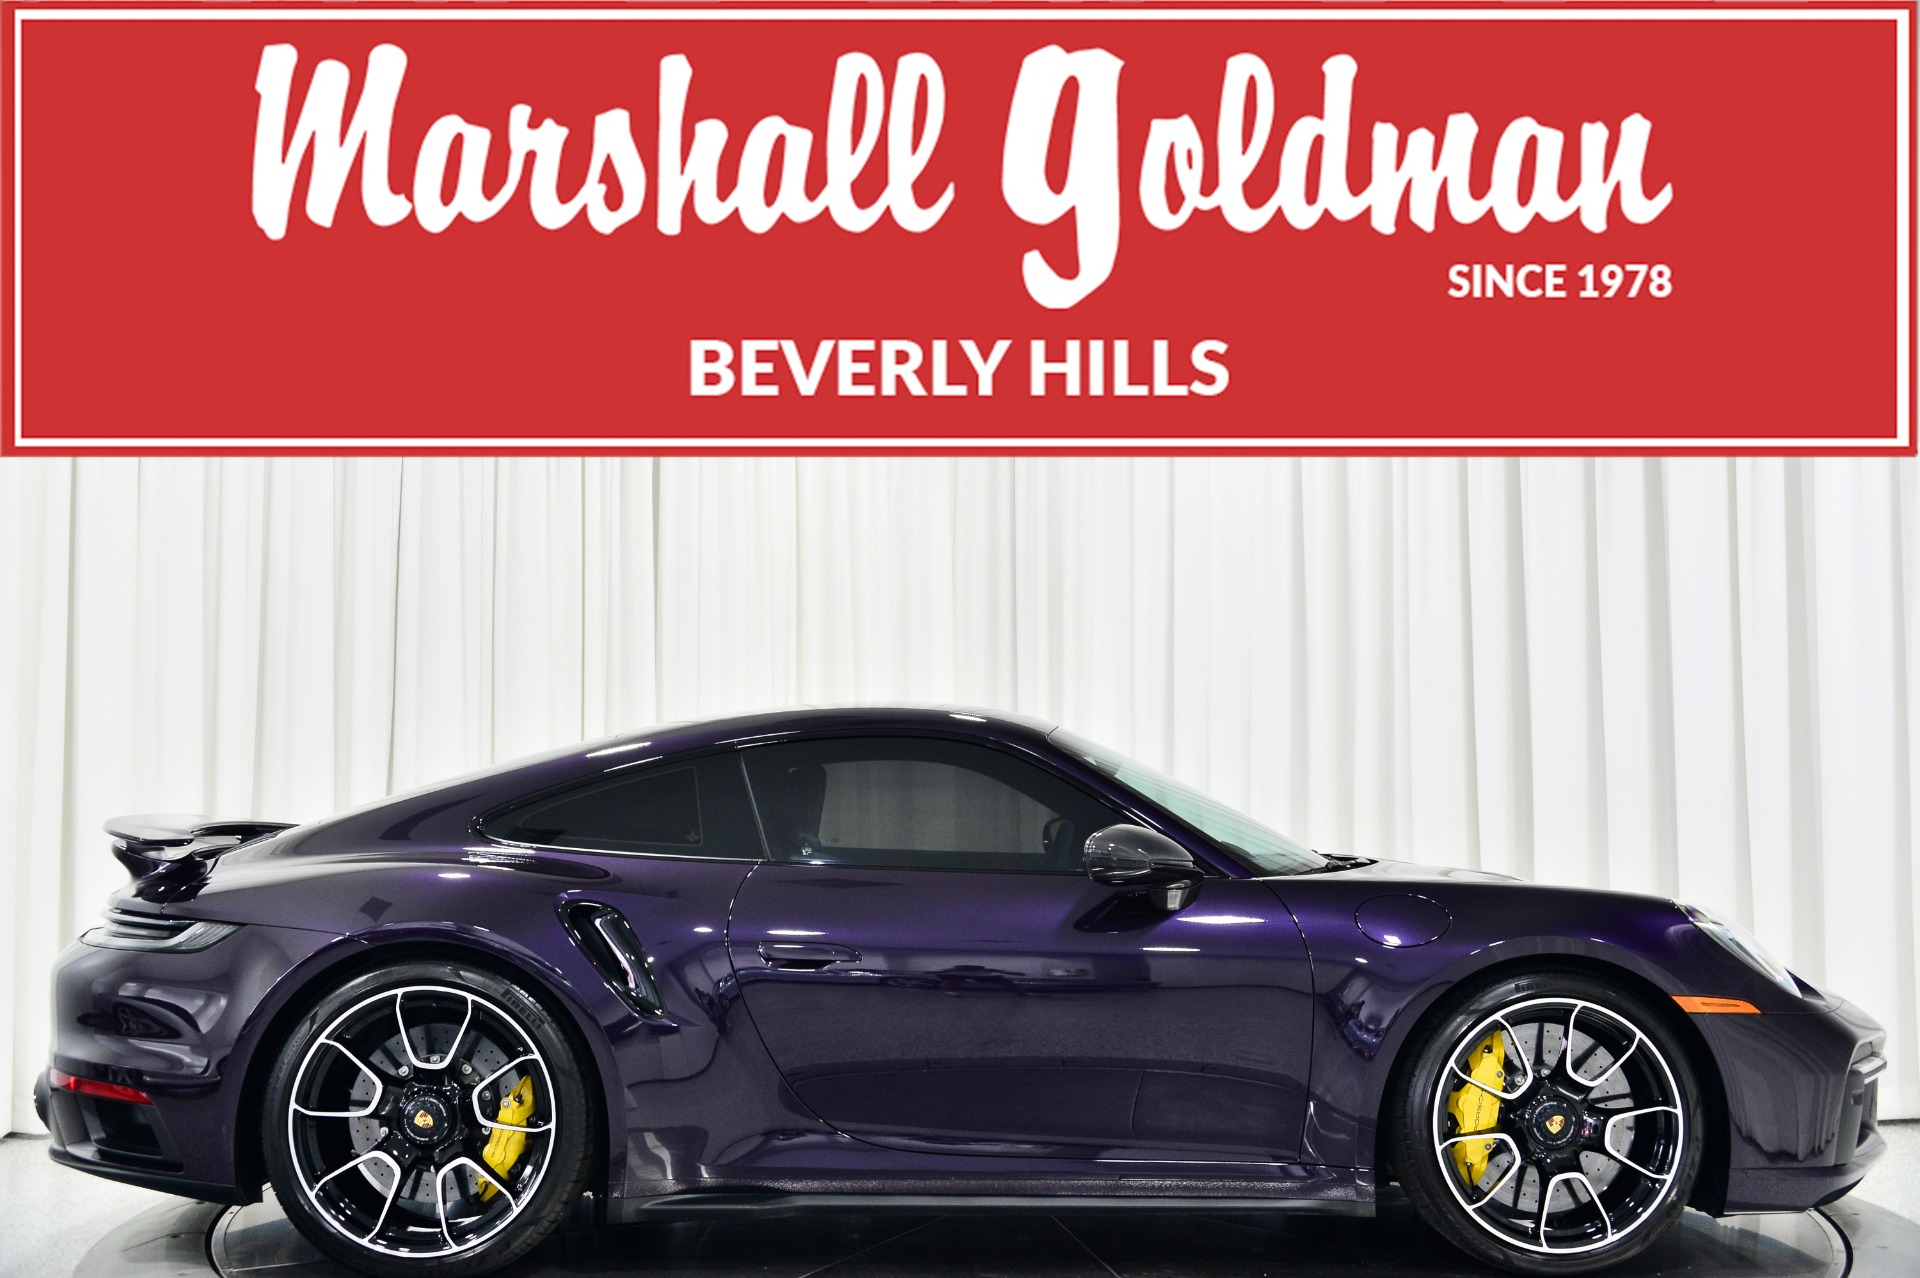 Used 2021 Porsche 911 Turbo S For Sale (Sold) | Marshall Goldman Beverly  Hills Stock #B22524